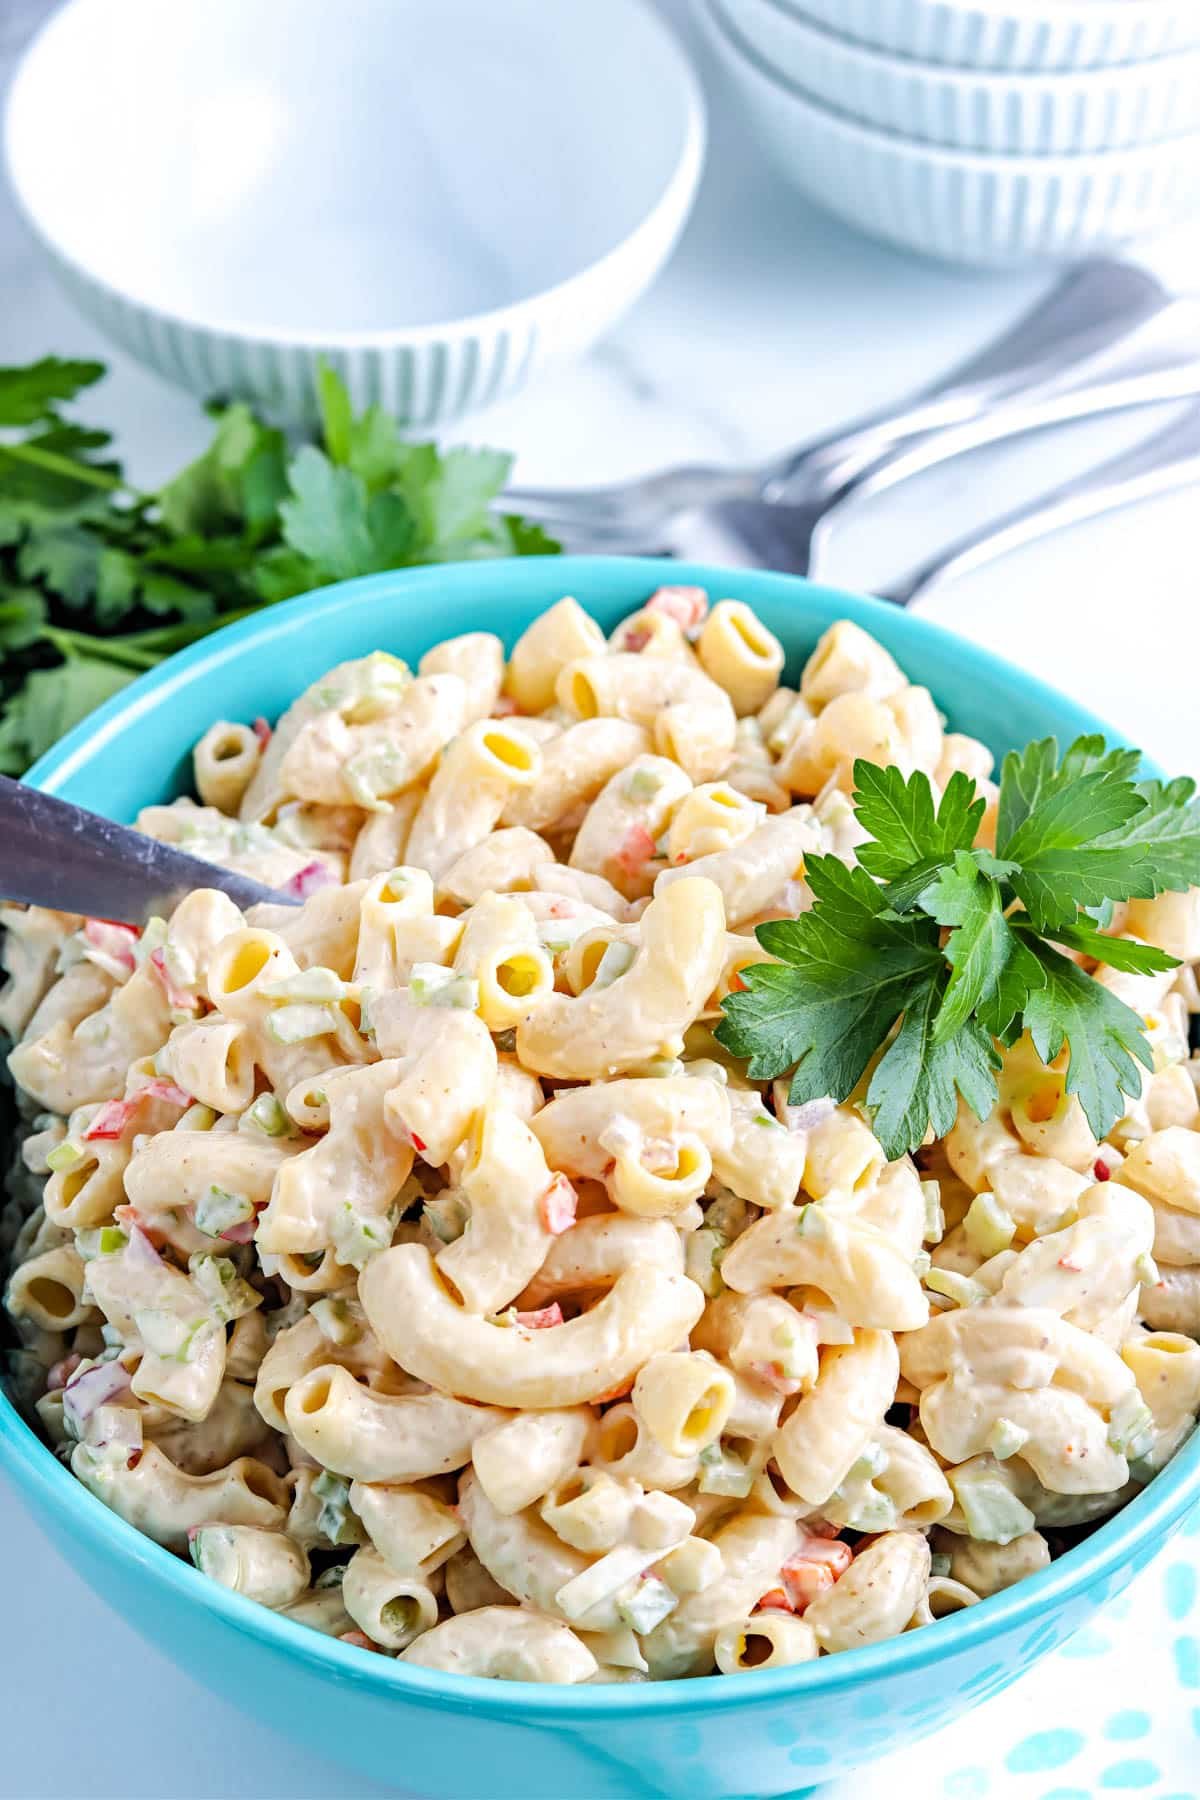 The finished Deli Style Macaroni Salad in a blue serving bowl.